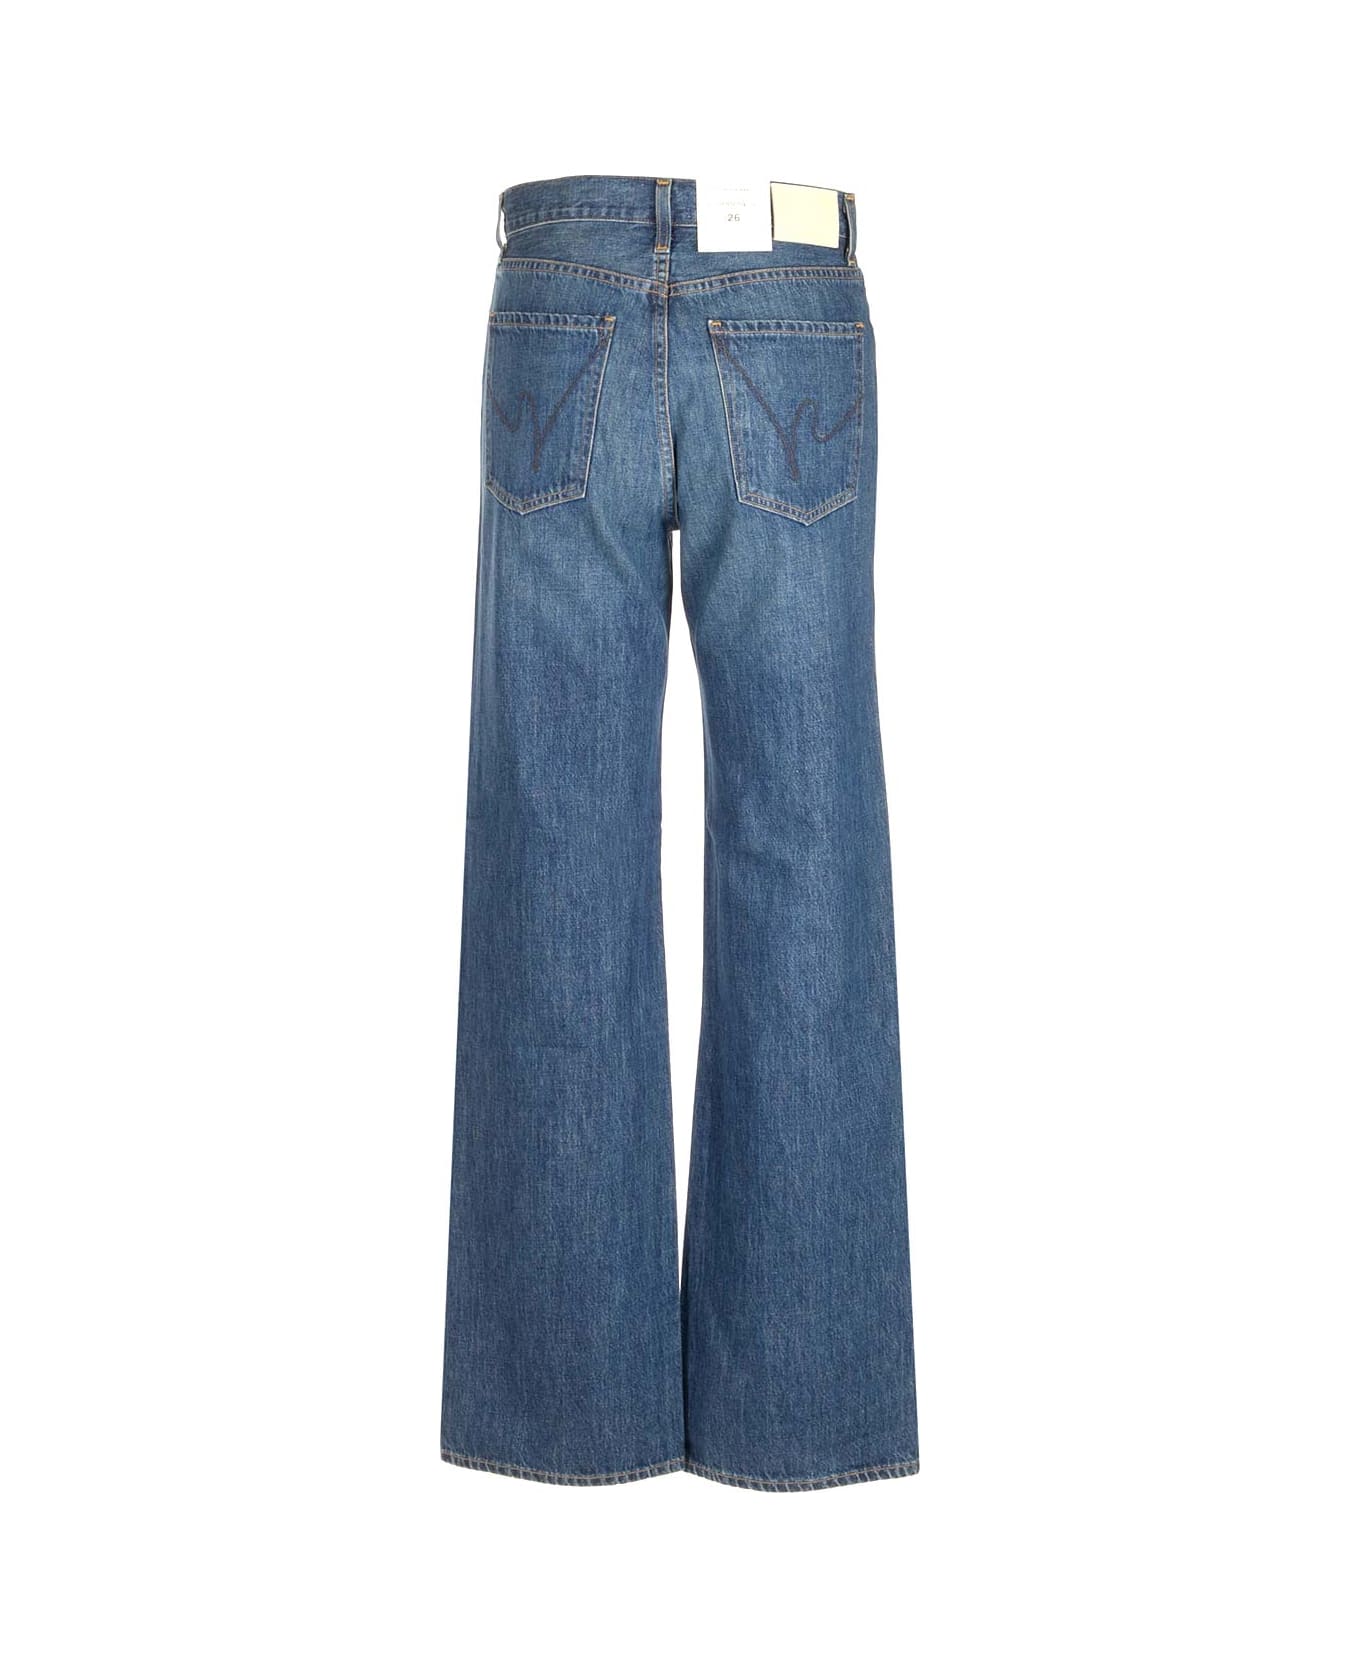 Citizens of Humanity "annina" Wide Leg Jeans - Blue